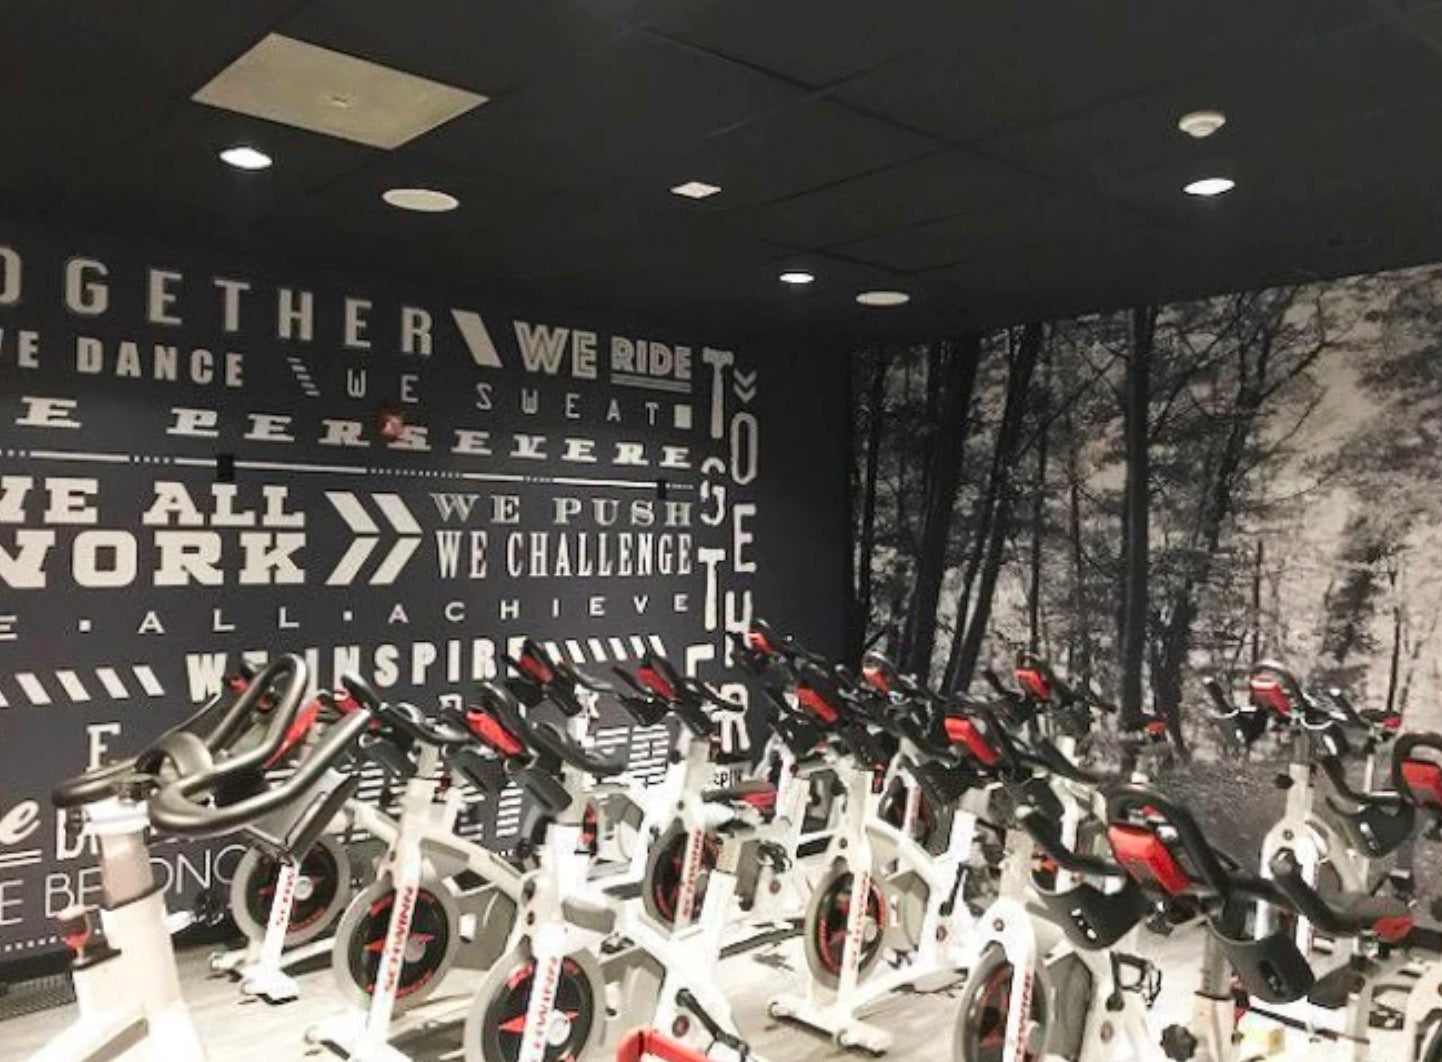 Wall mural ideas for the gym